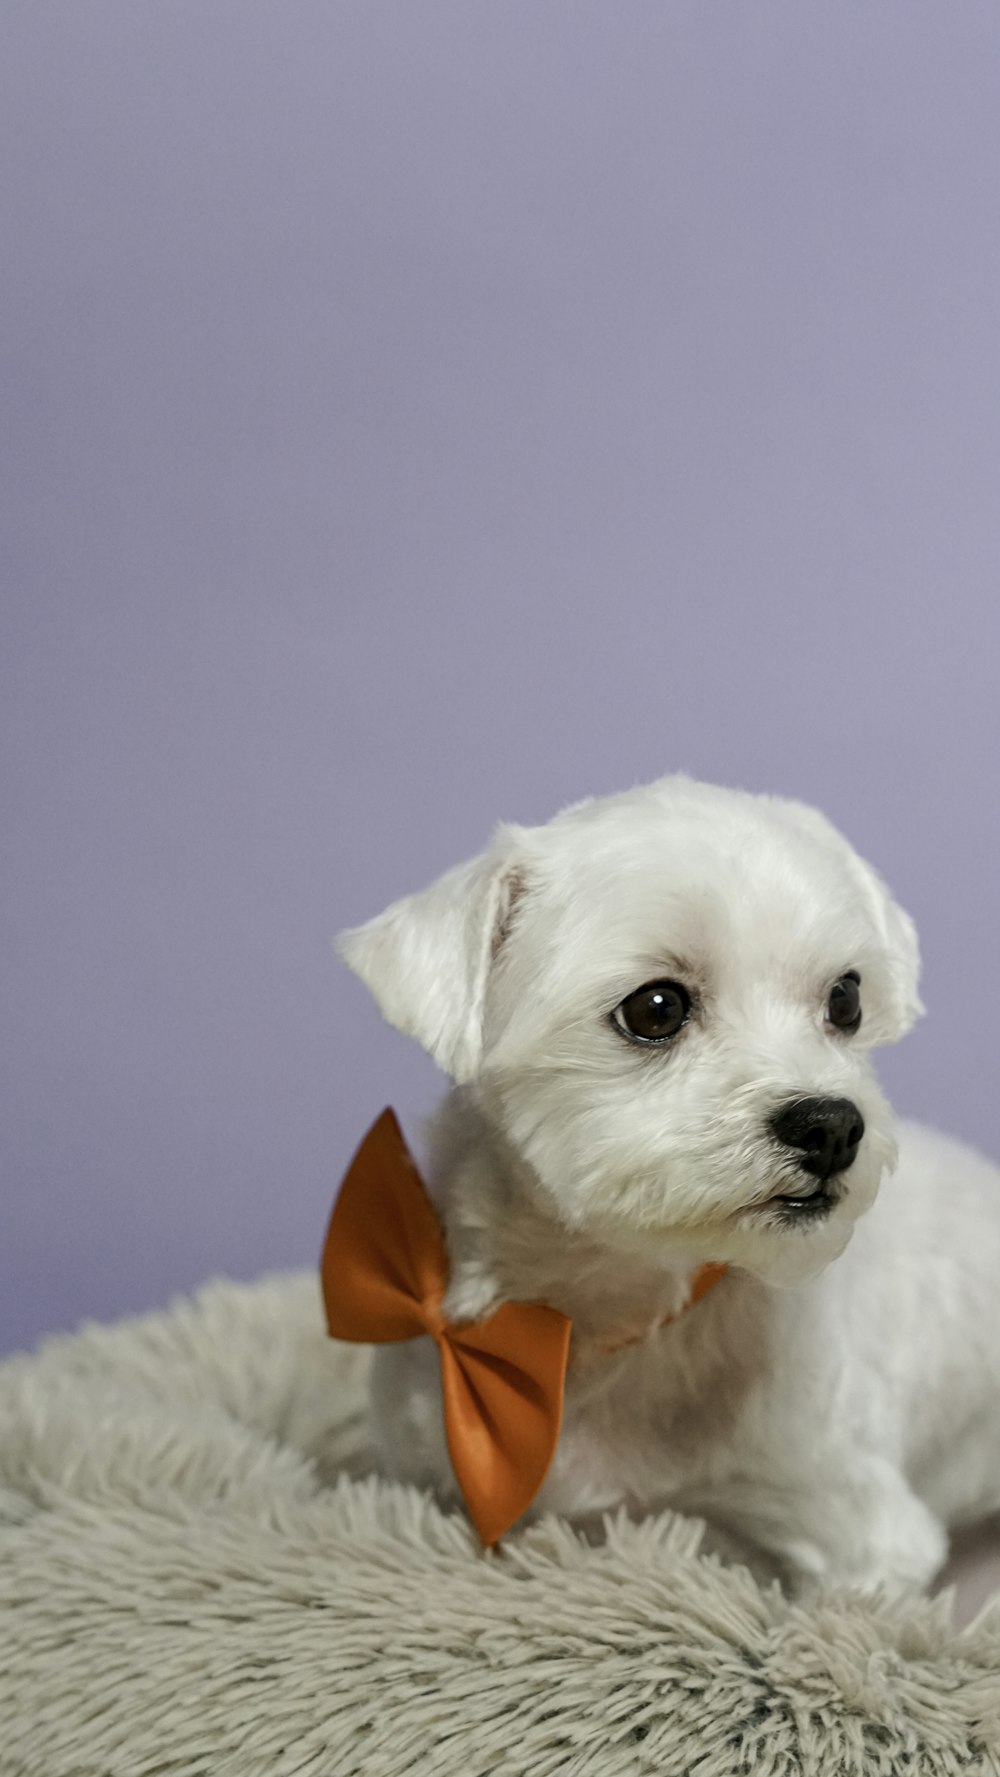 white long coated small dog with red bow tie